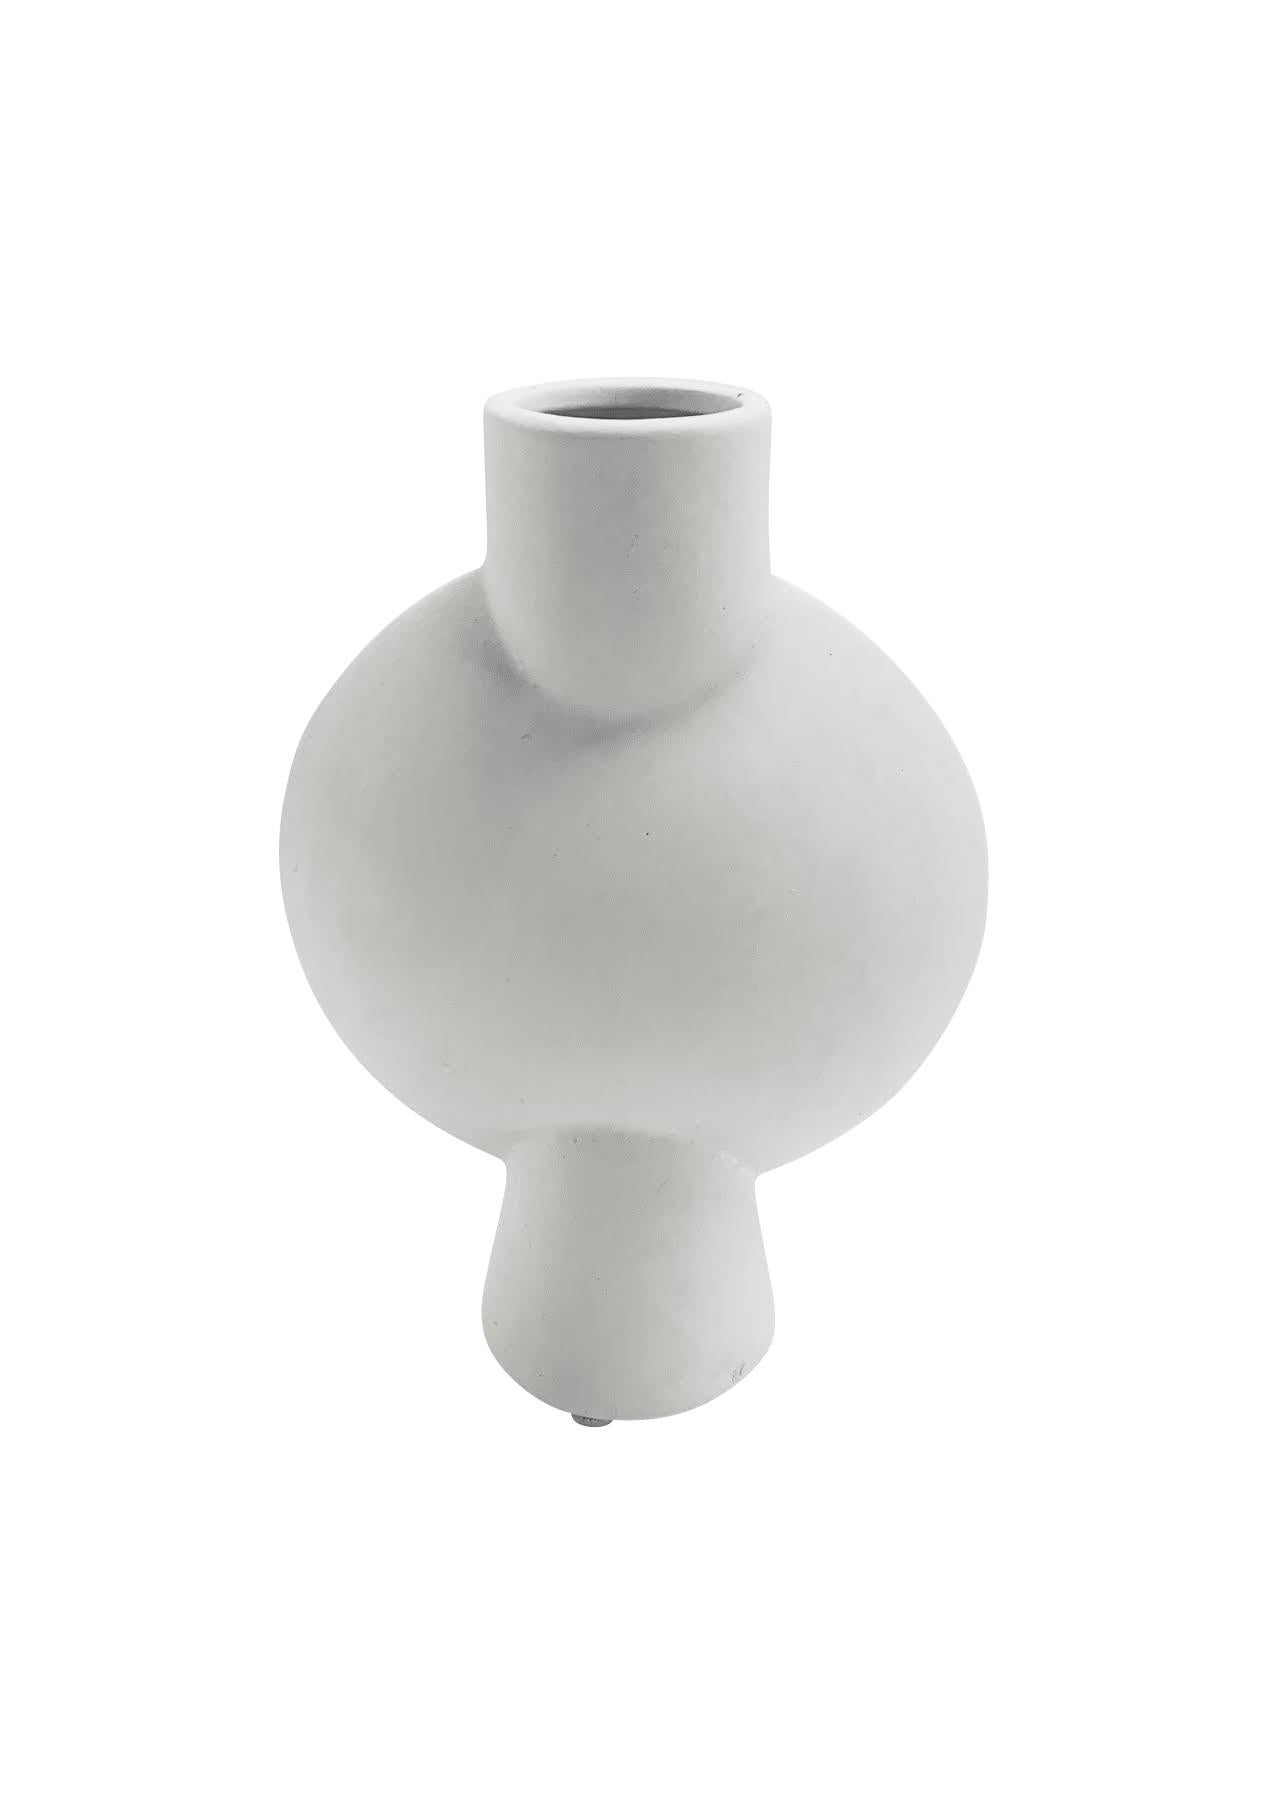 Contemporary Danish design small center bubble vase.
Smooth white finish
Part of a very large collection